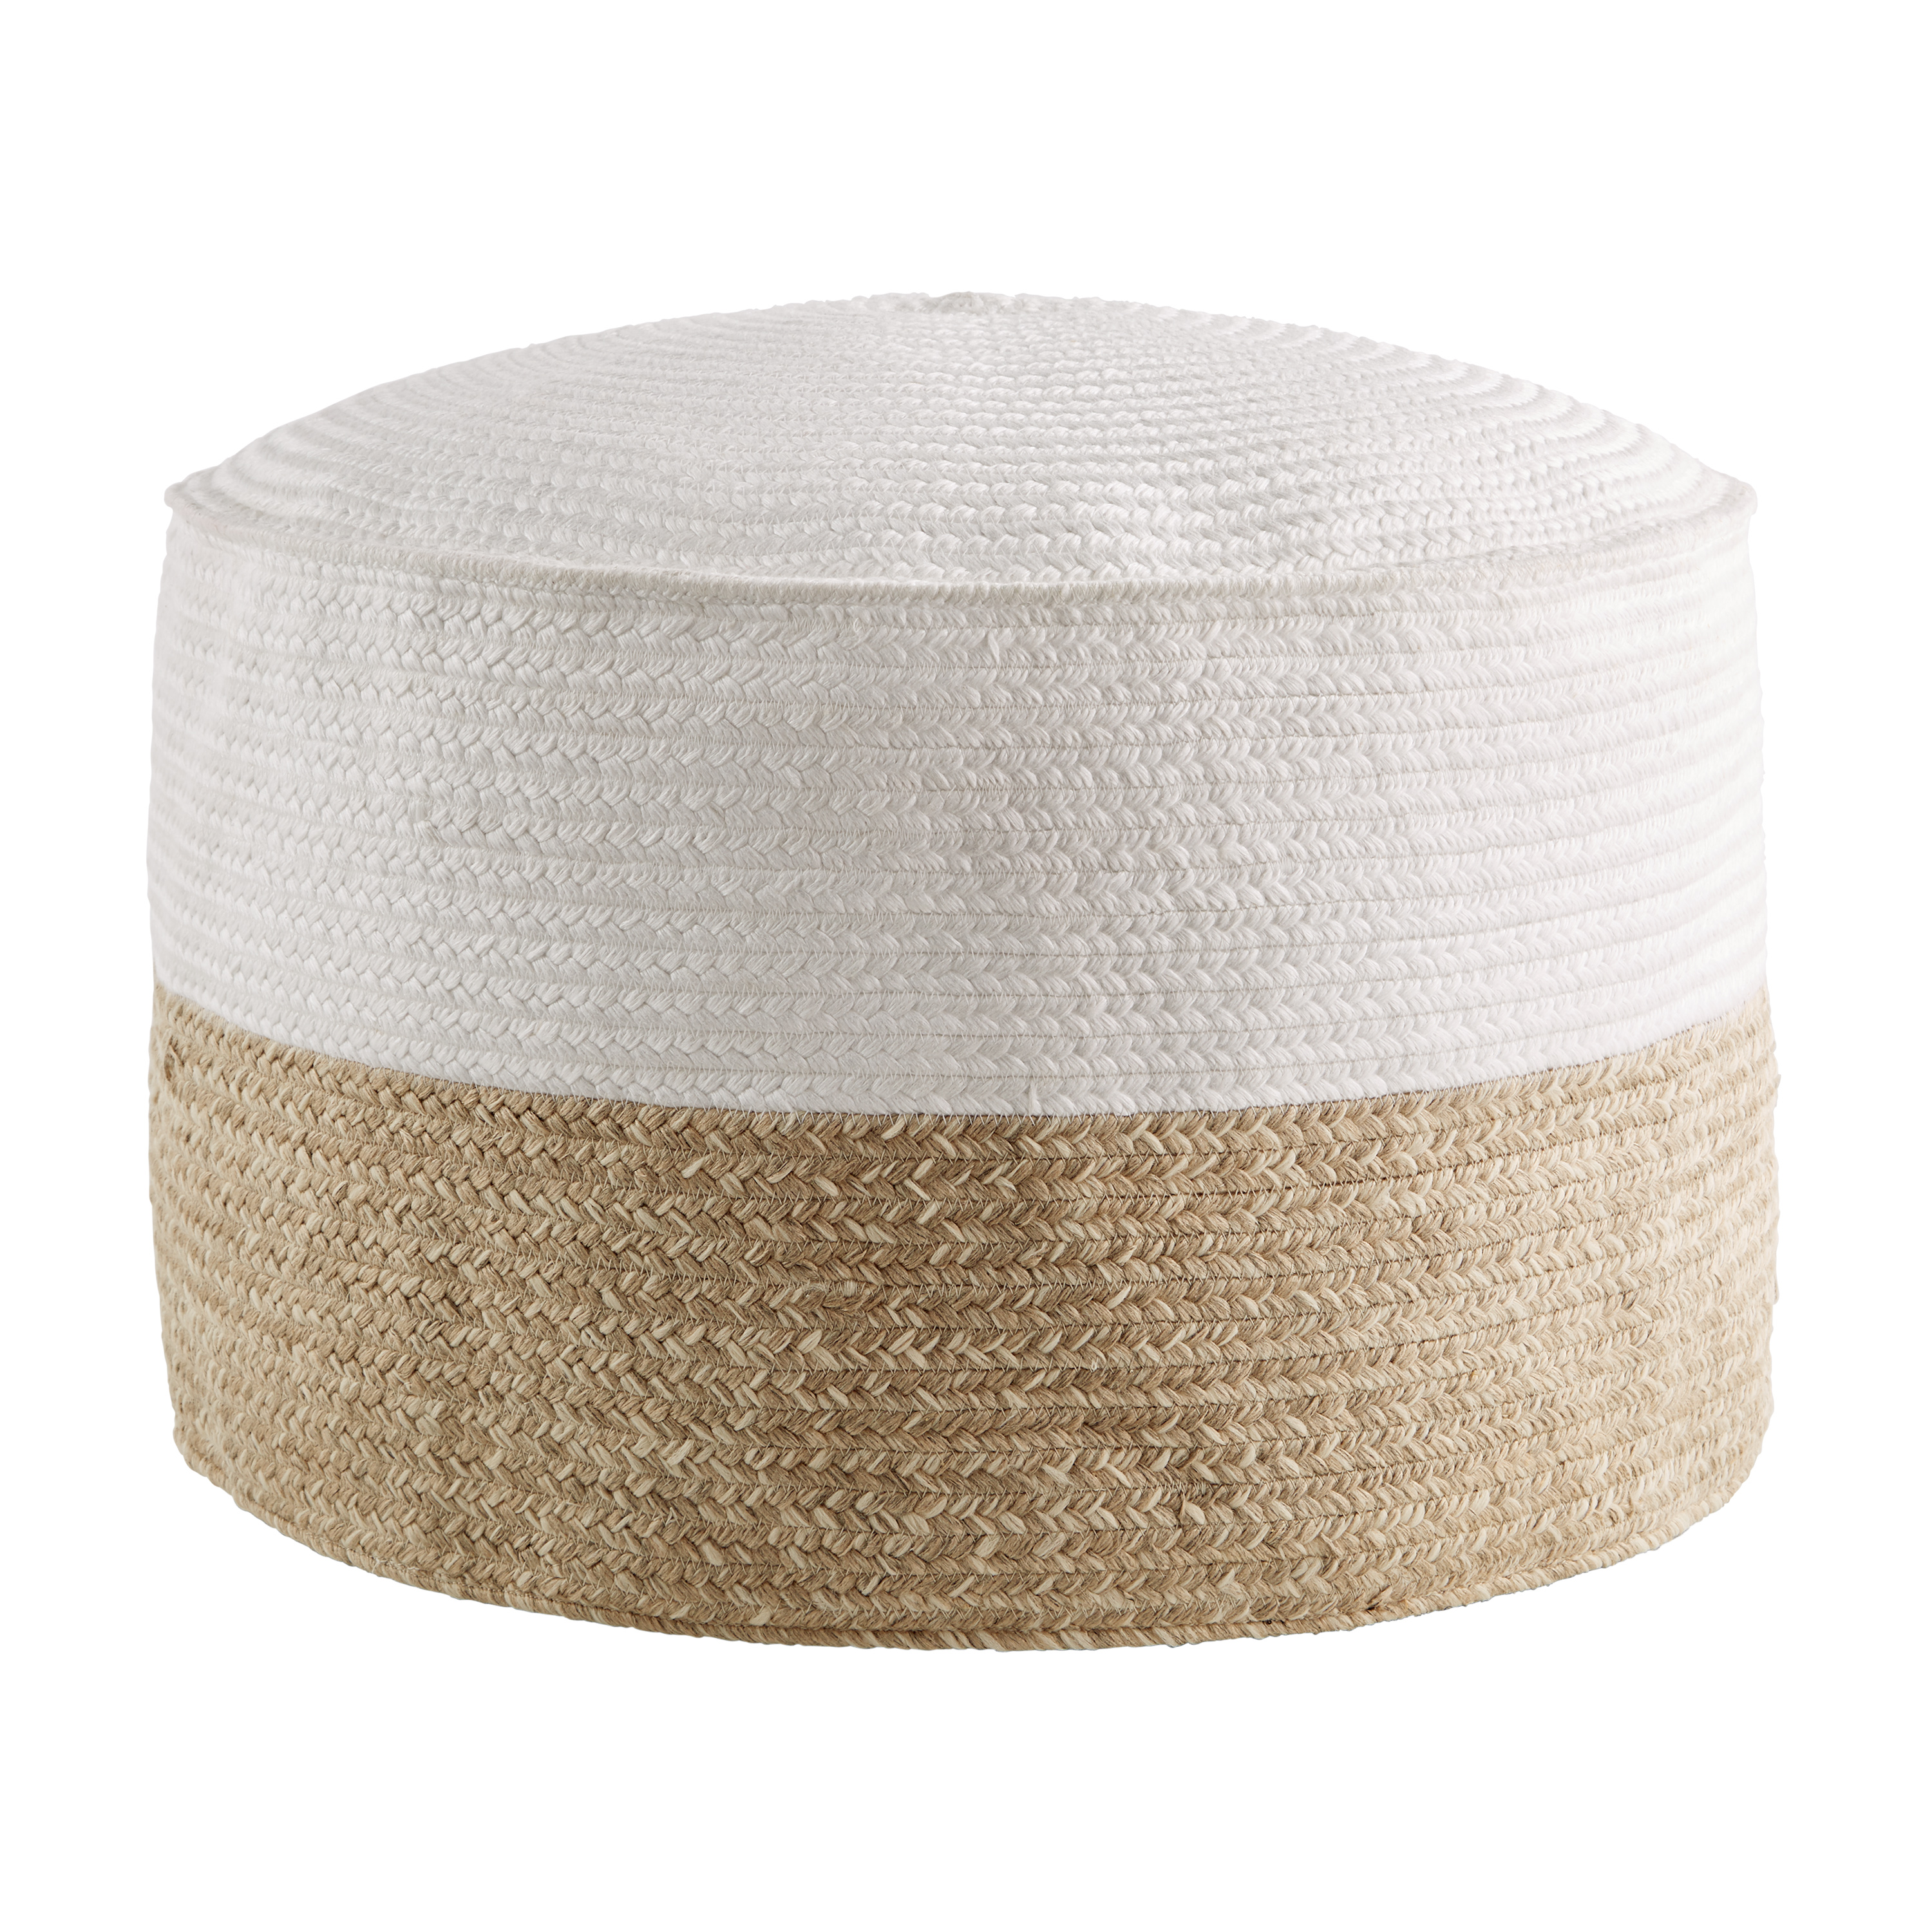 D&JM Brown and Ivory Round Outdoor Pouf Ottoman - image 1 of 9